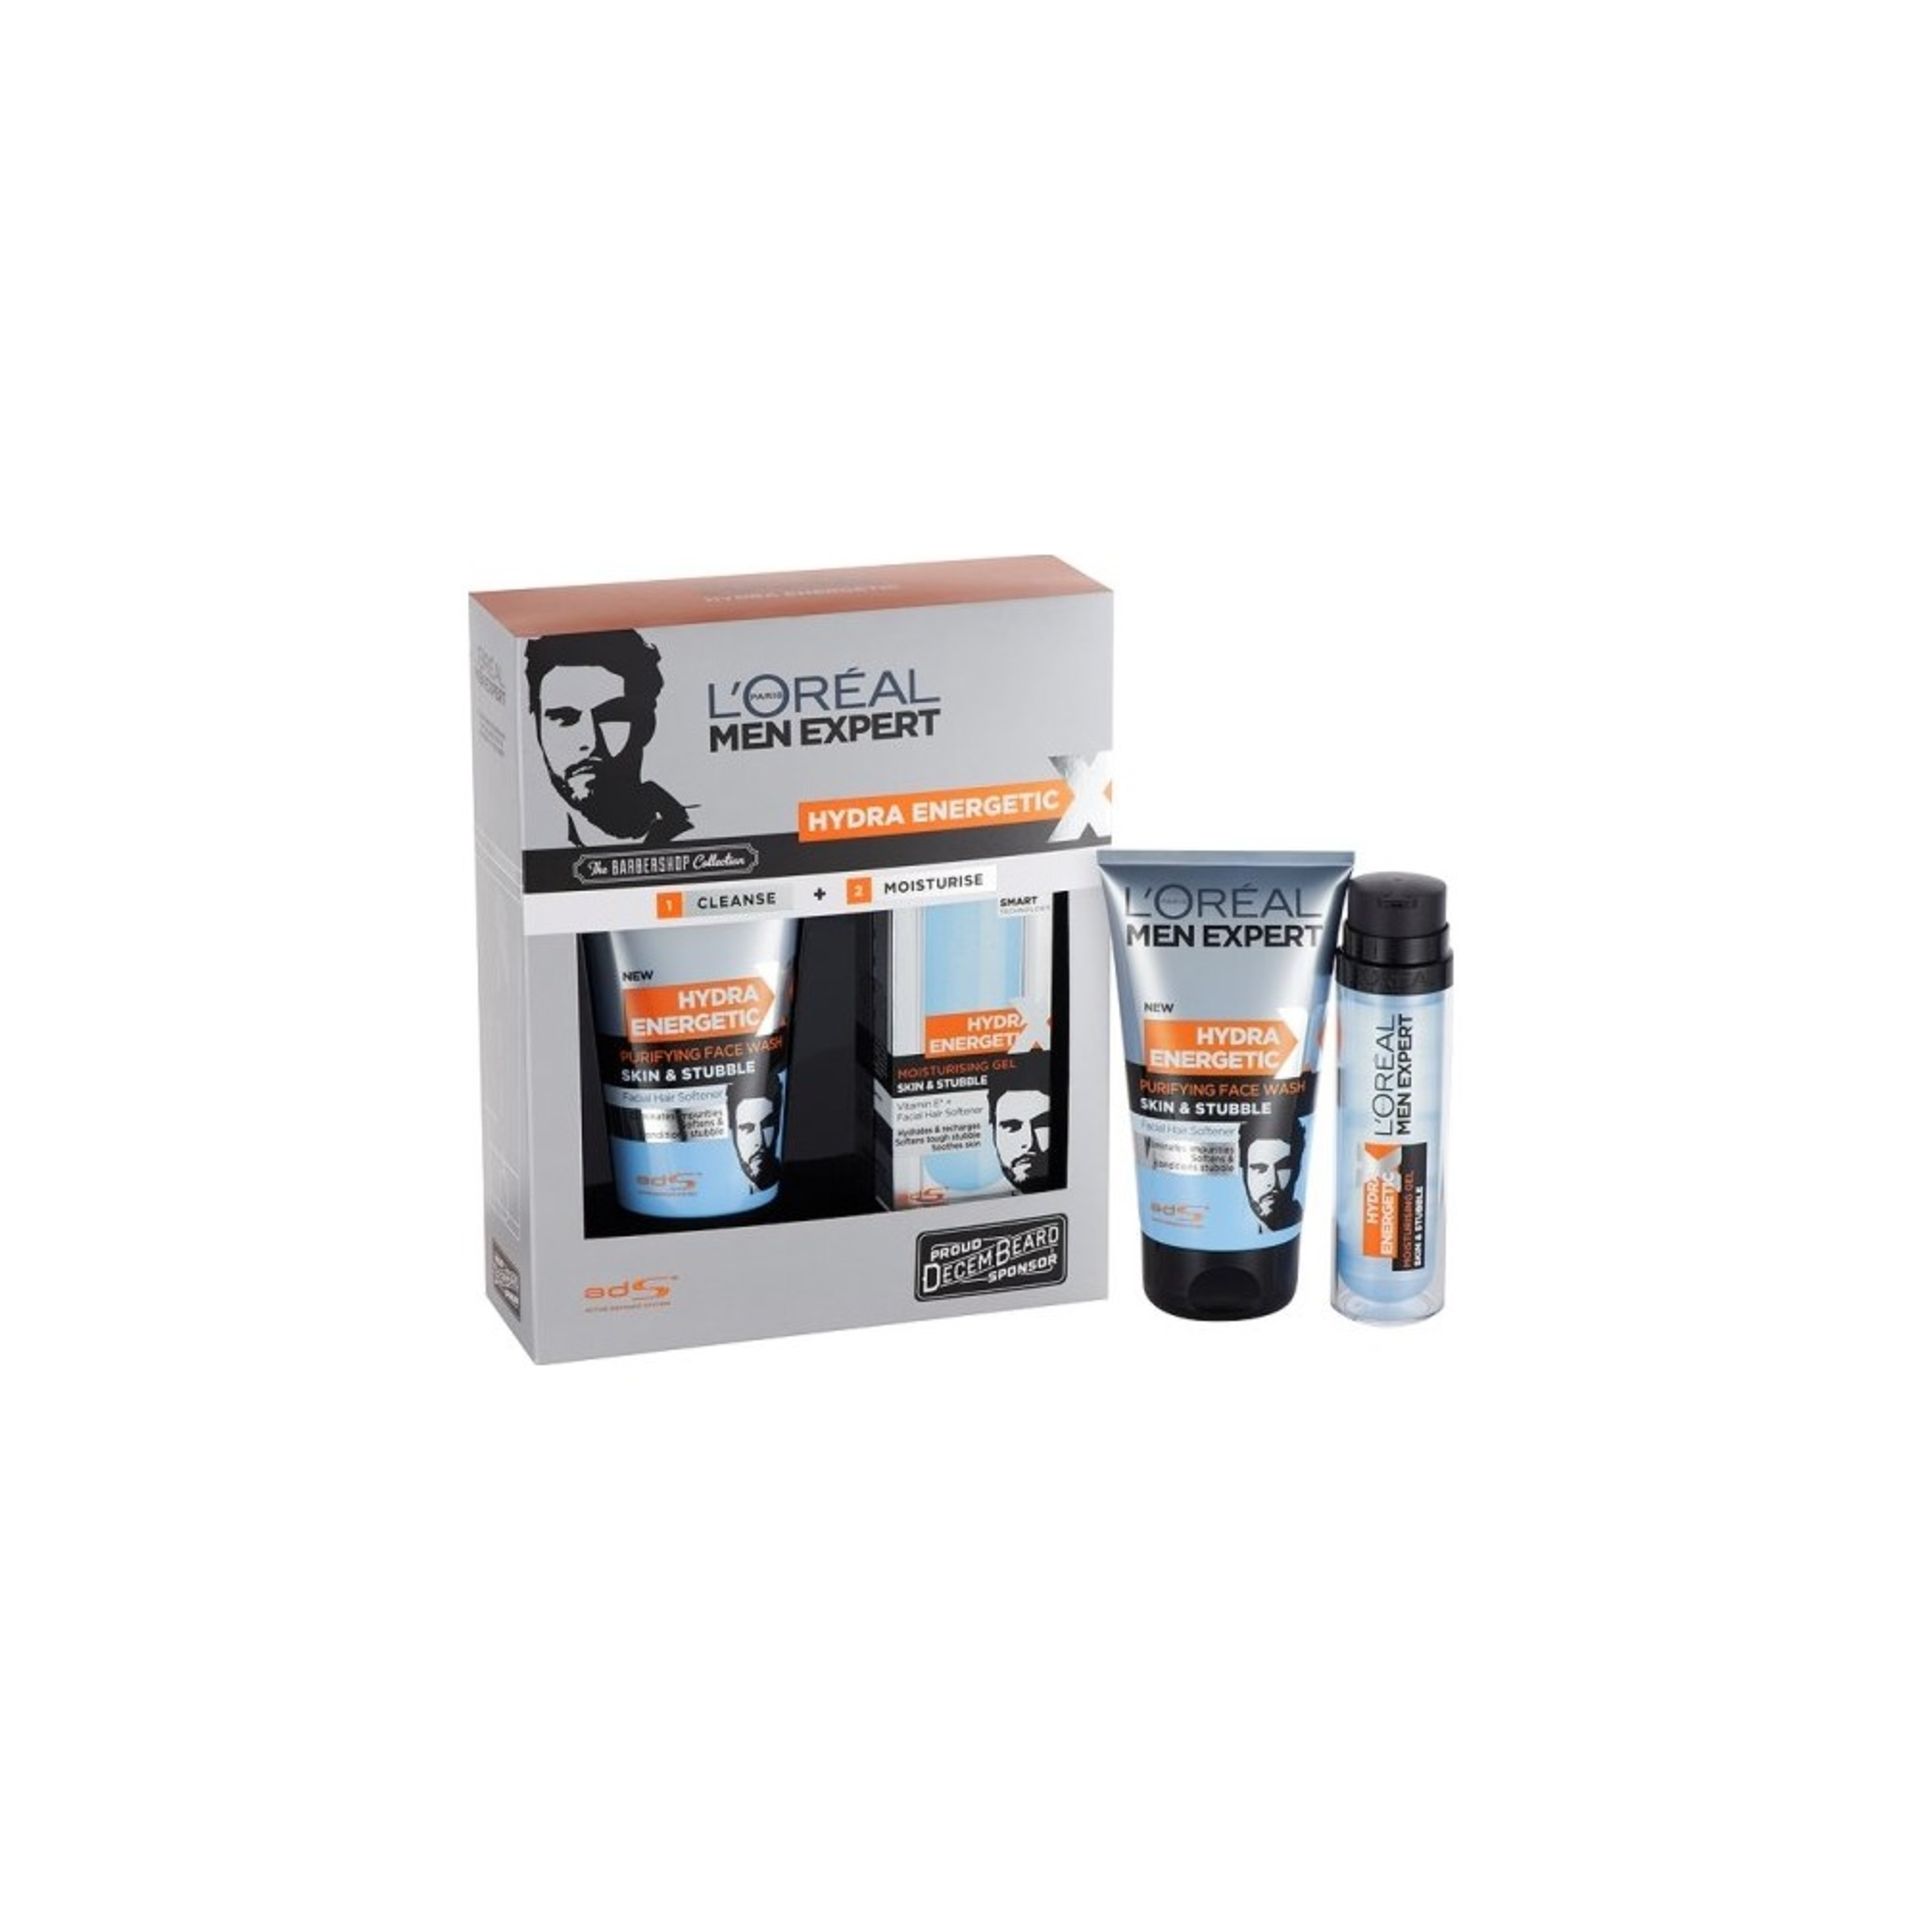 V Brand New L'Oreal Men Expert Hydra Energetic Gift Set Including Purifying Face Wash (150ml)